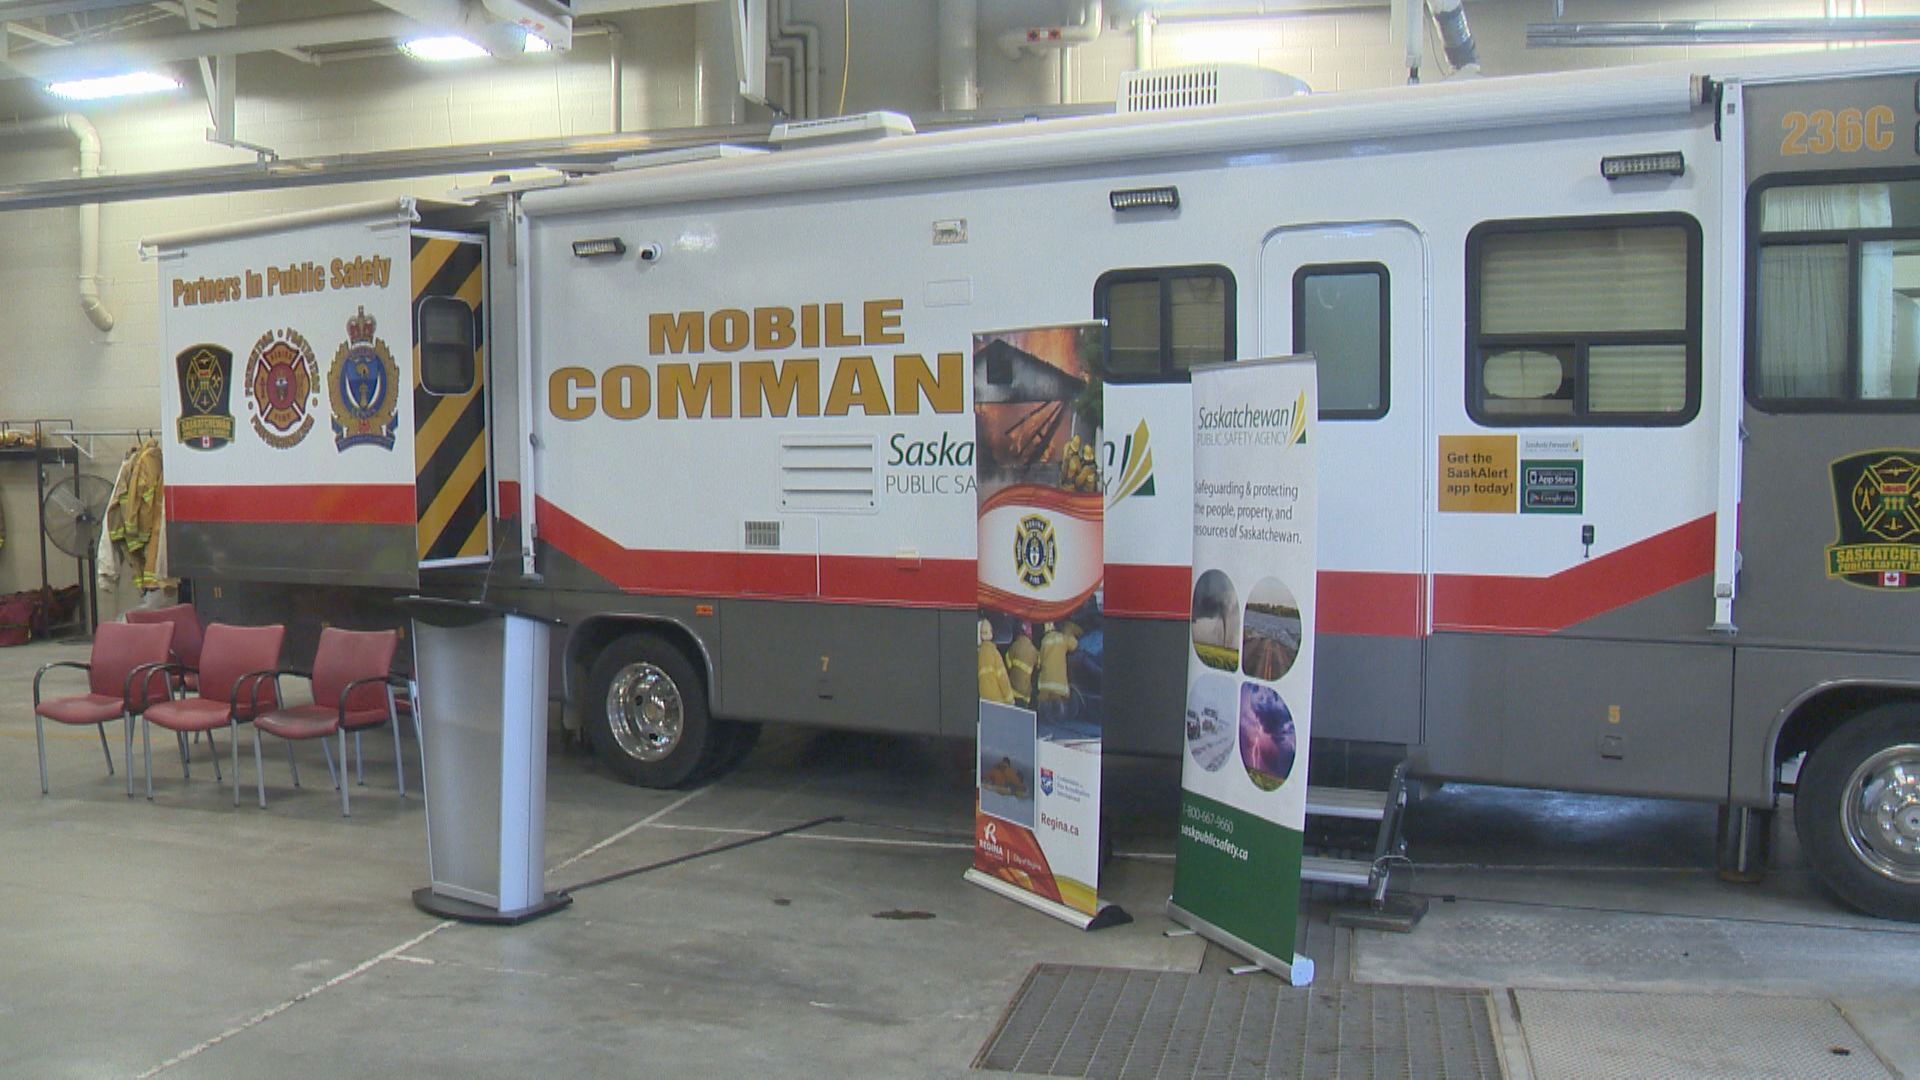 New mobile command post for Regina and area unveiled by 3 partnered agencies